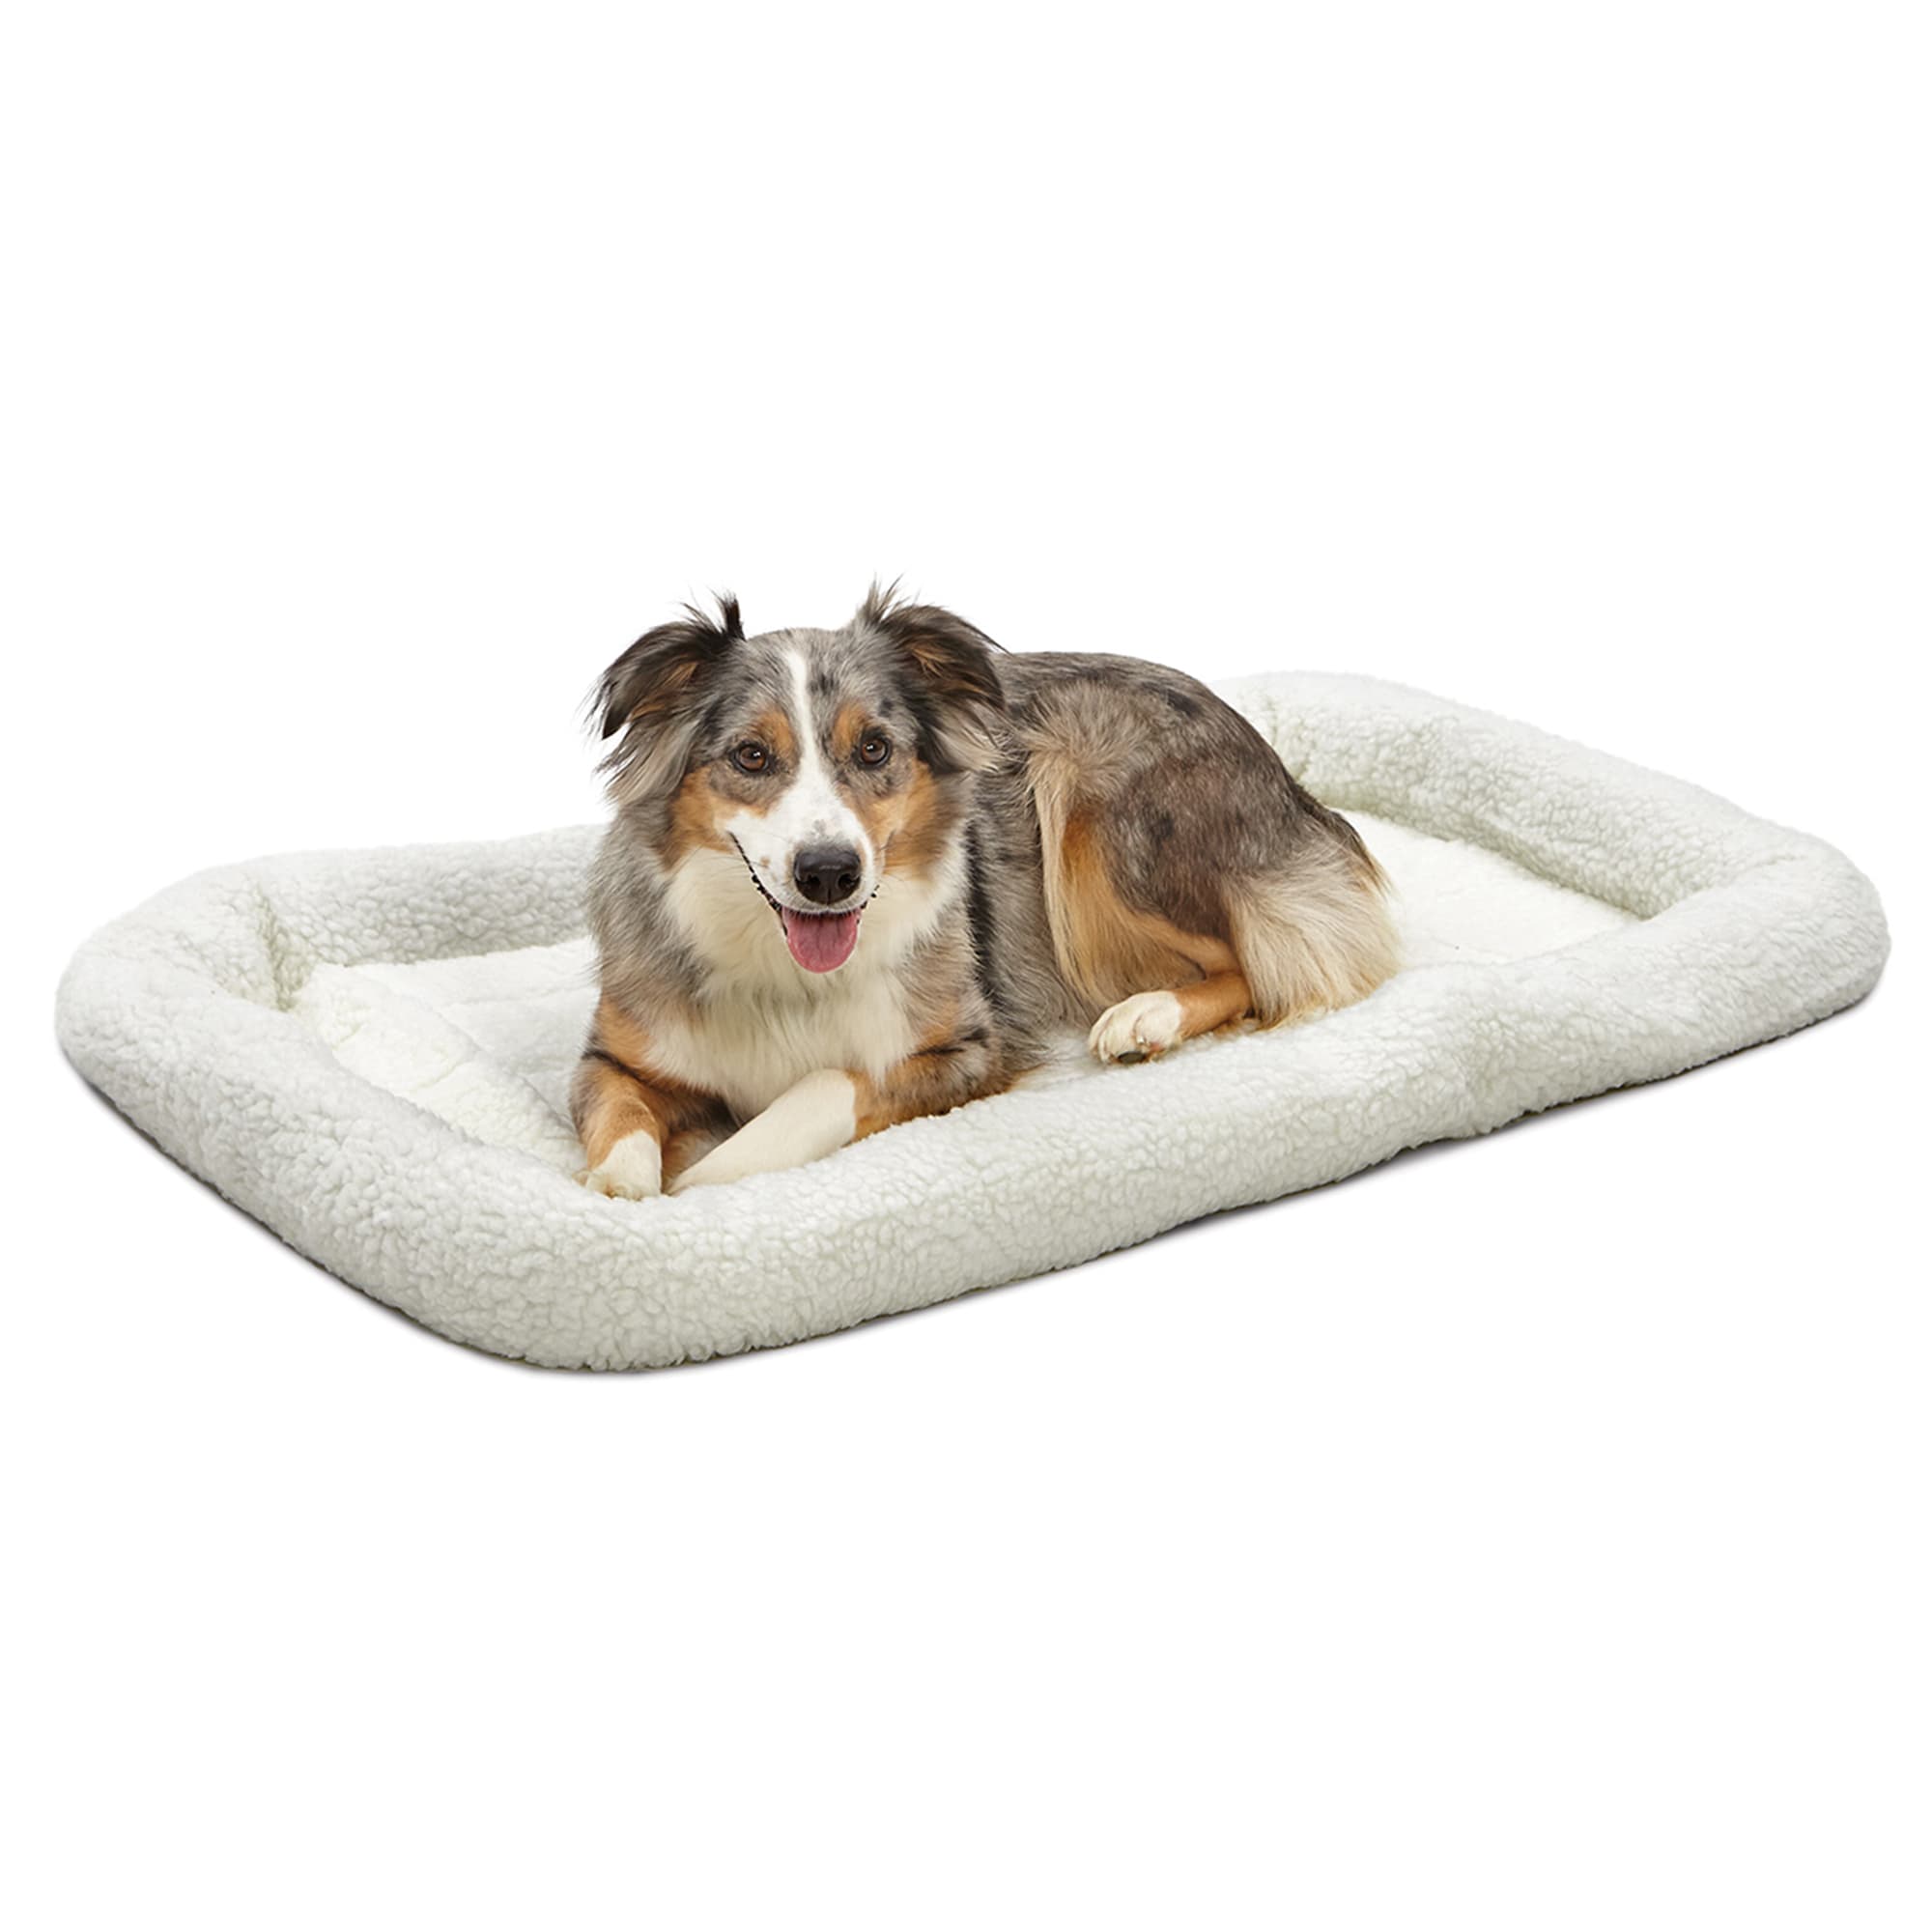 Photos - Dog Bed / Basket Midwest Quiet Time Bolster White Dog Bed, 42" L X 26" W, X-Large, 